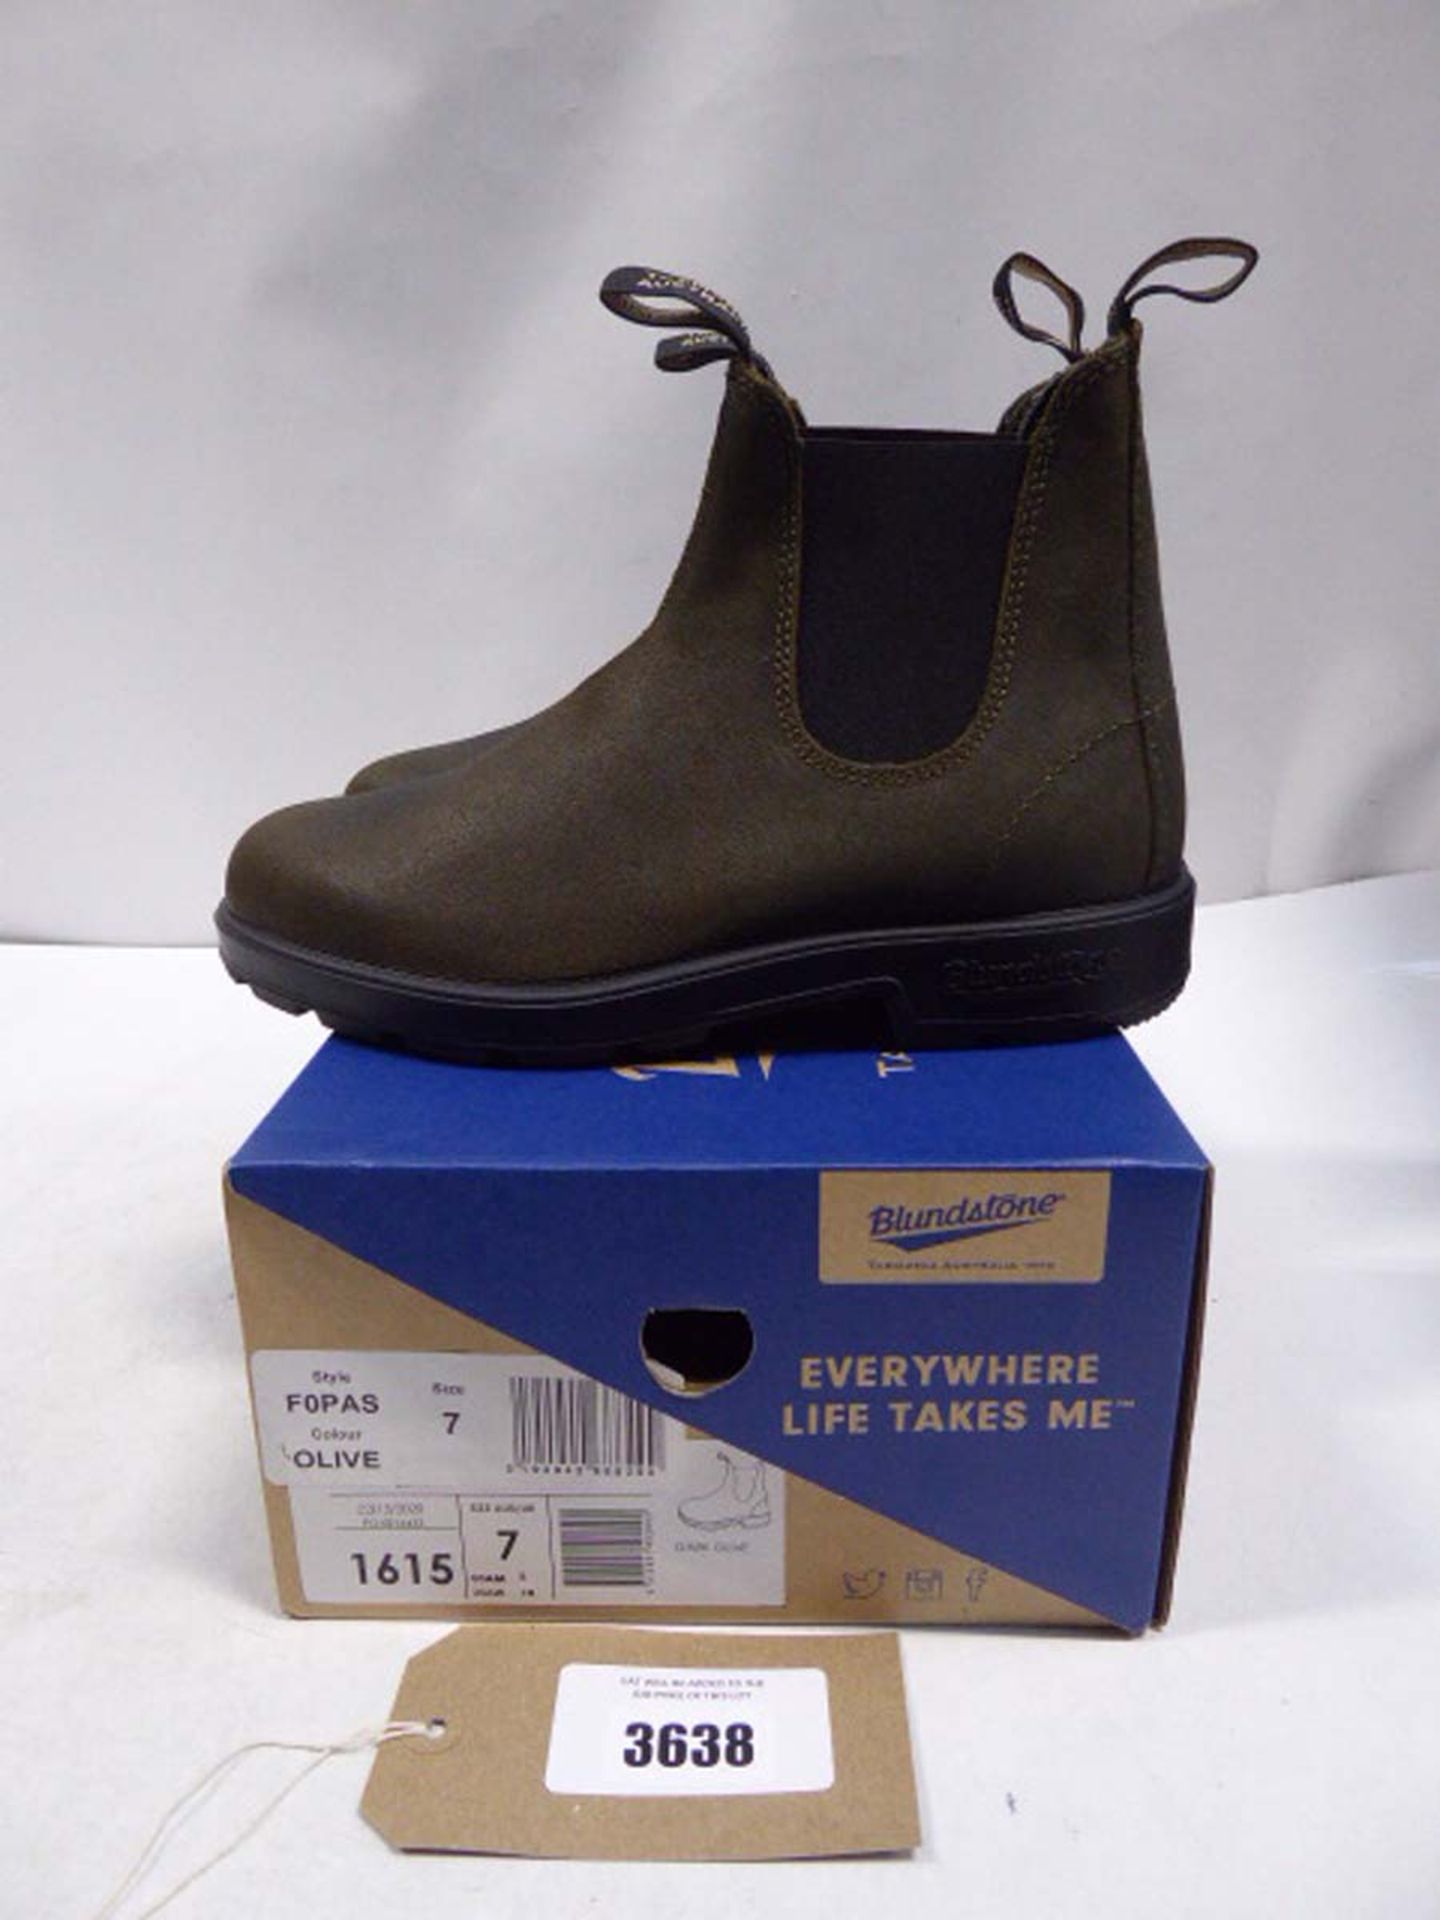 Blundstone olive ankle boots size 7